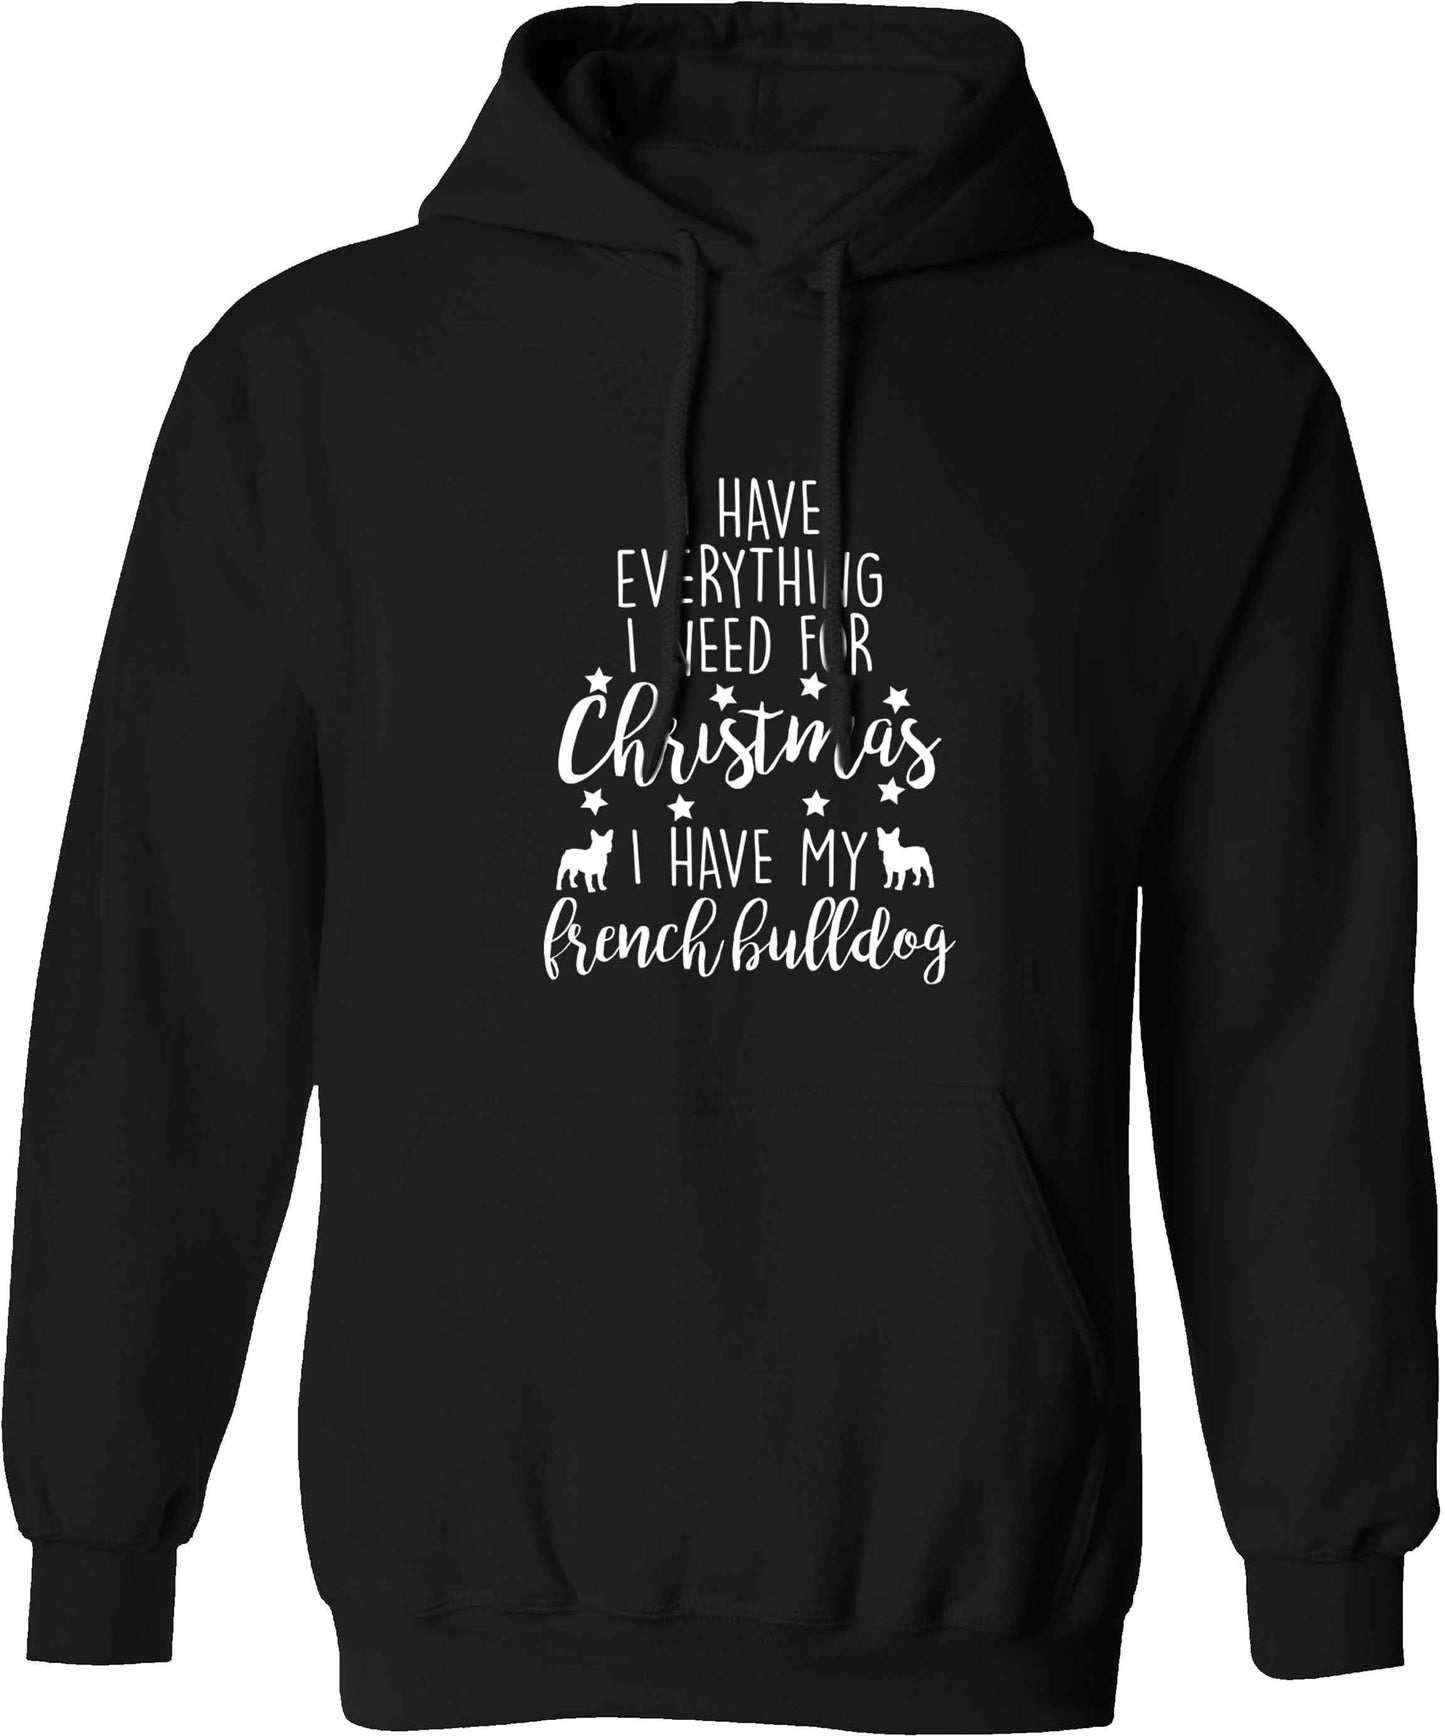 I have everything I need for Christmas I have my french bulldog adults unisex black hoodie 2XL